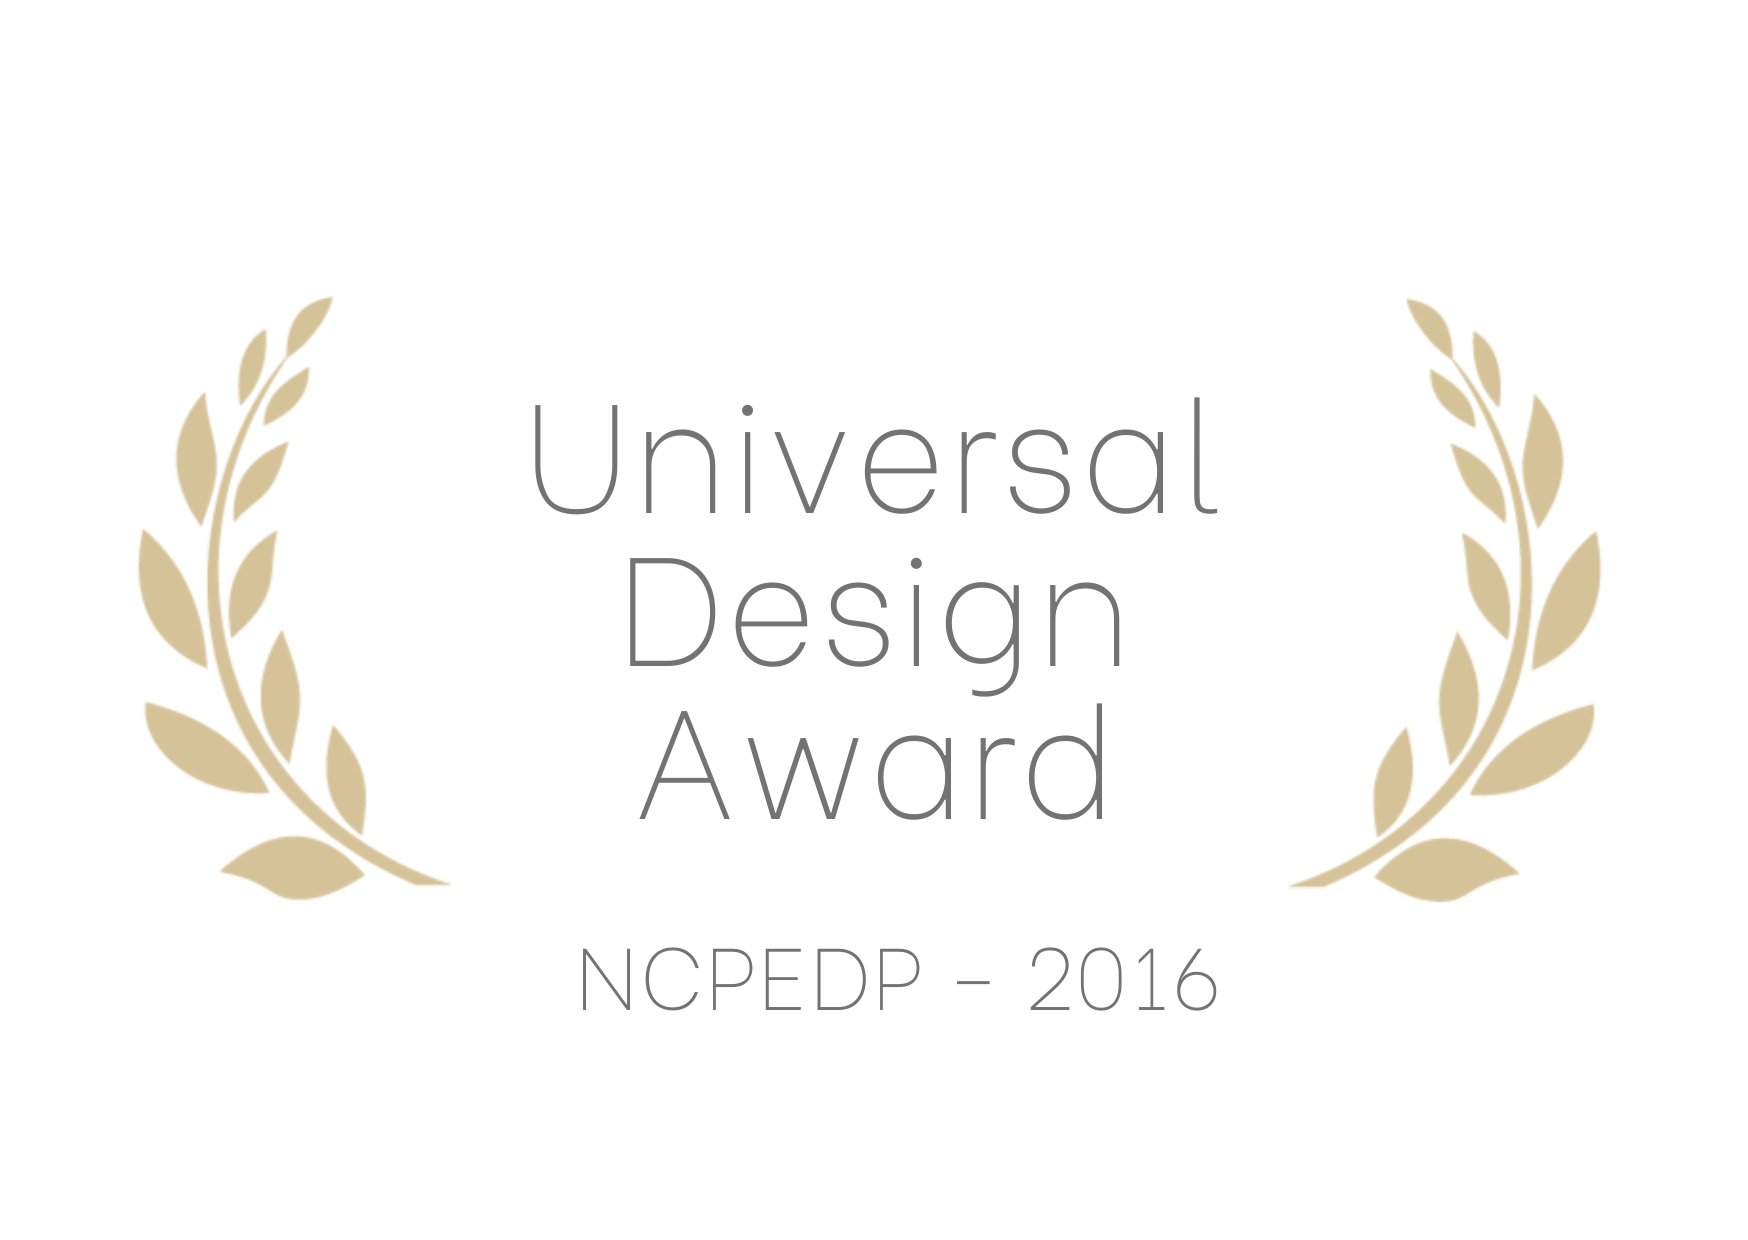 Universal Design Award 2016 Award received from NCEPD